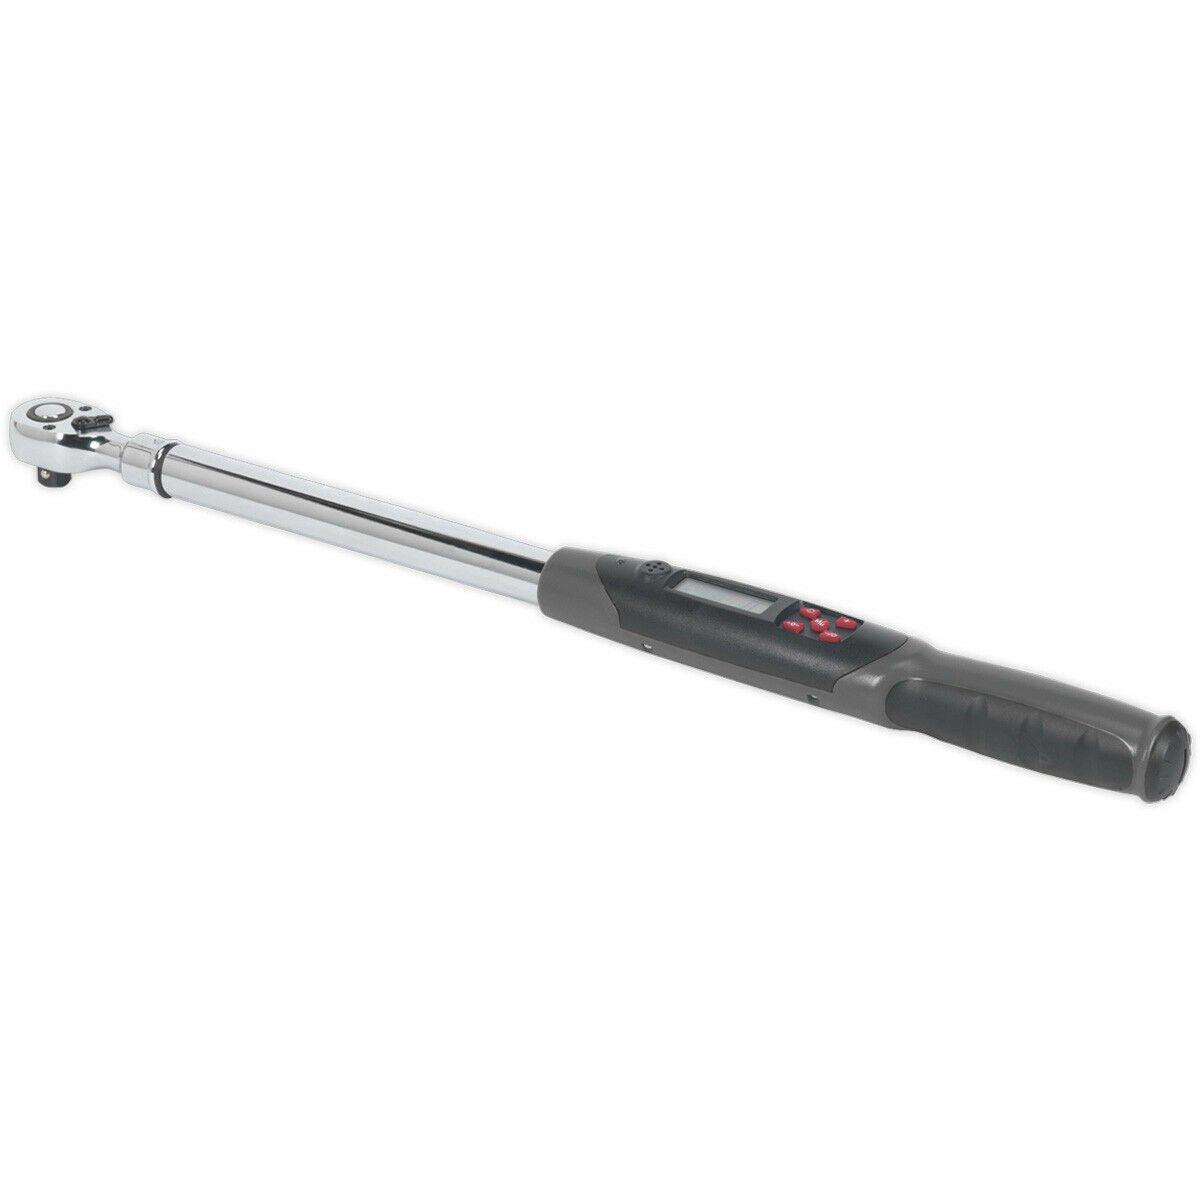 Digital Torque Wrench with Angle Function - 1/2